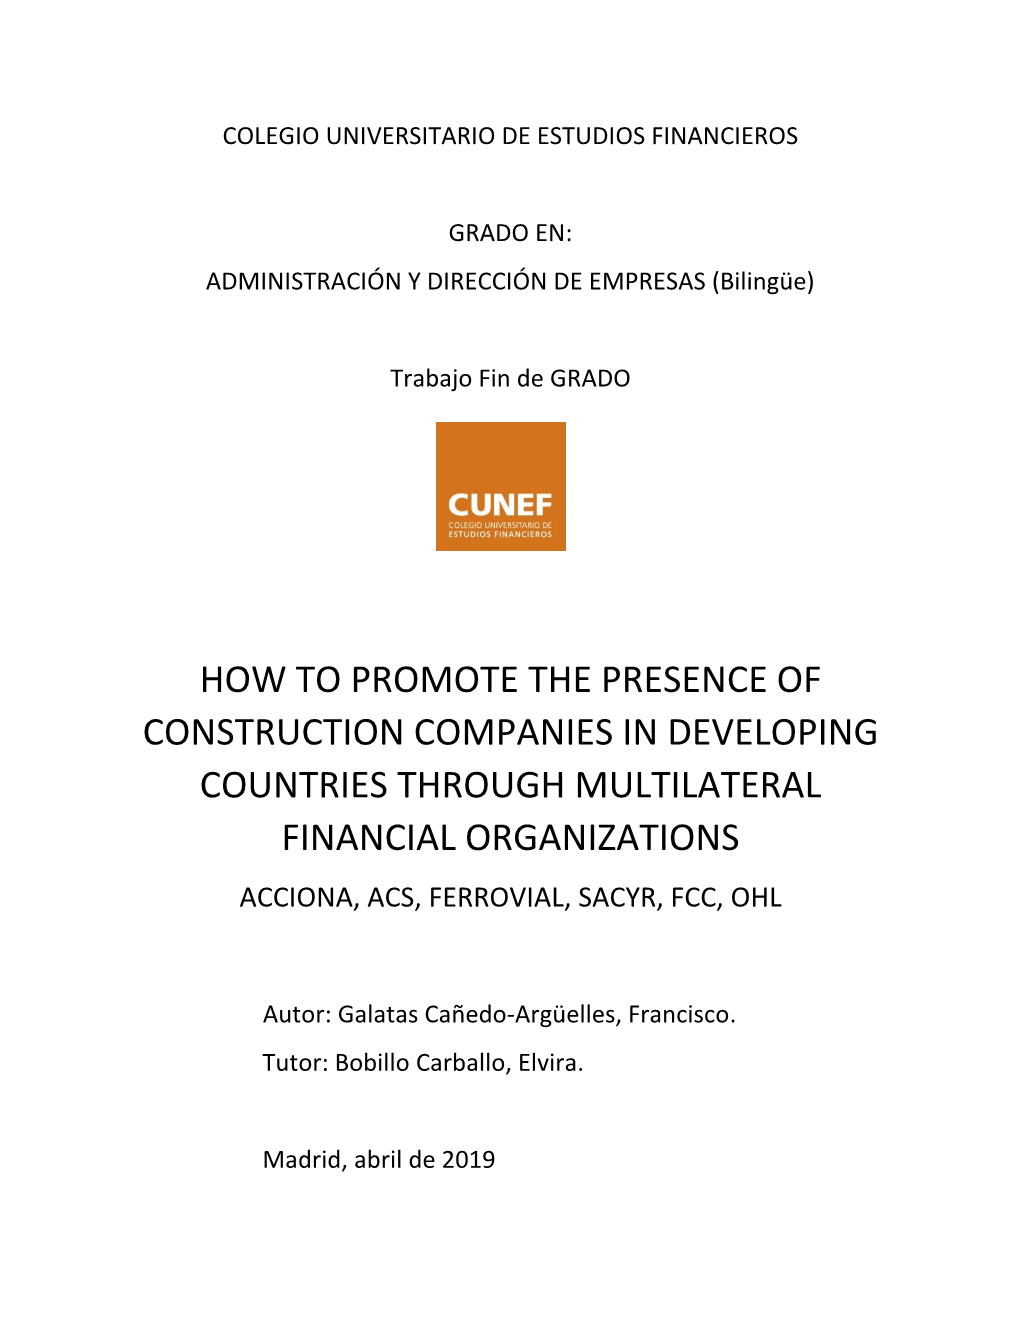 How to Promote the Presence of Construction Companies in Developing Countries Through Multilateral Financial Organizations Acciona, Acs, Ferrovial, Sacyr, Fcc, Ohl